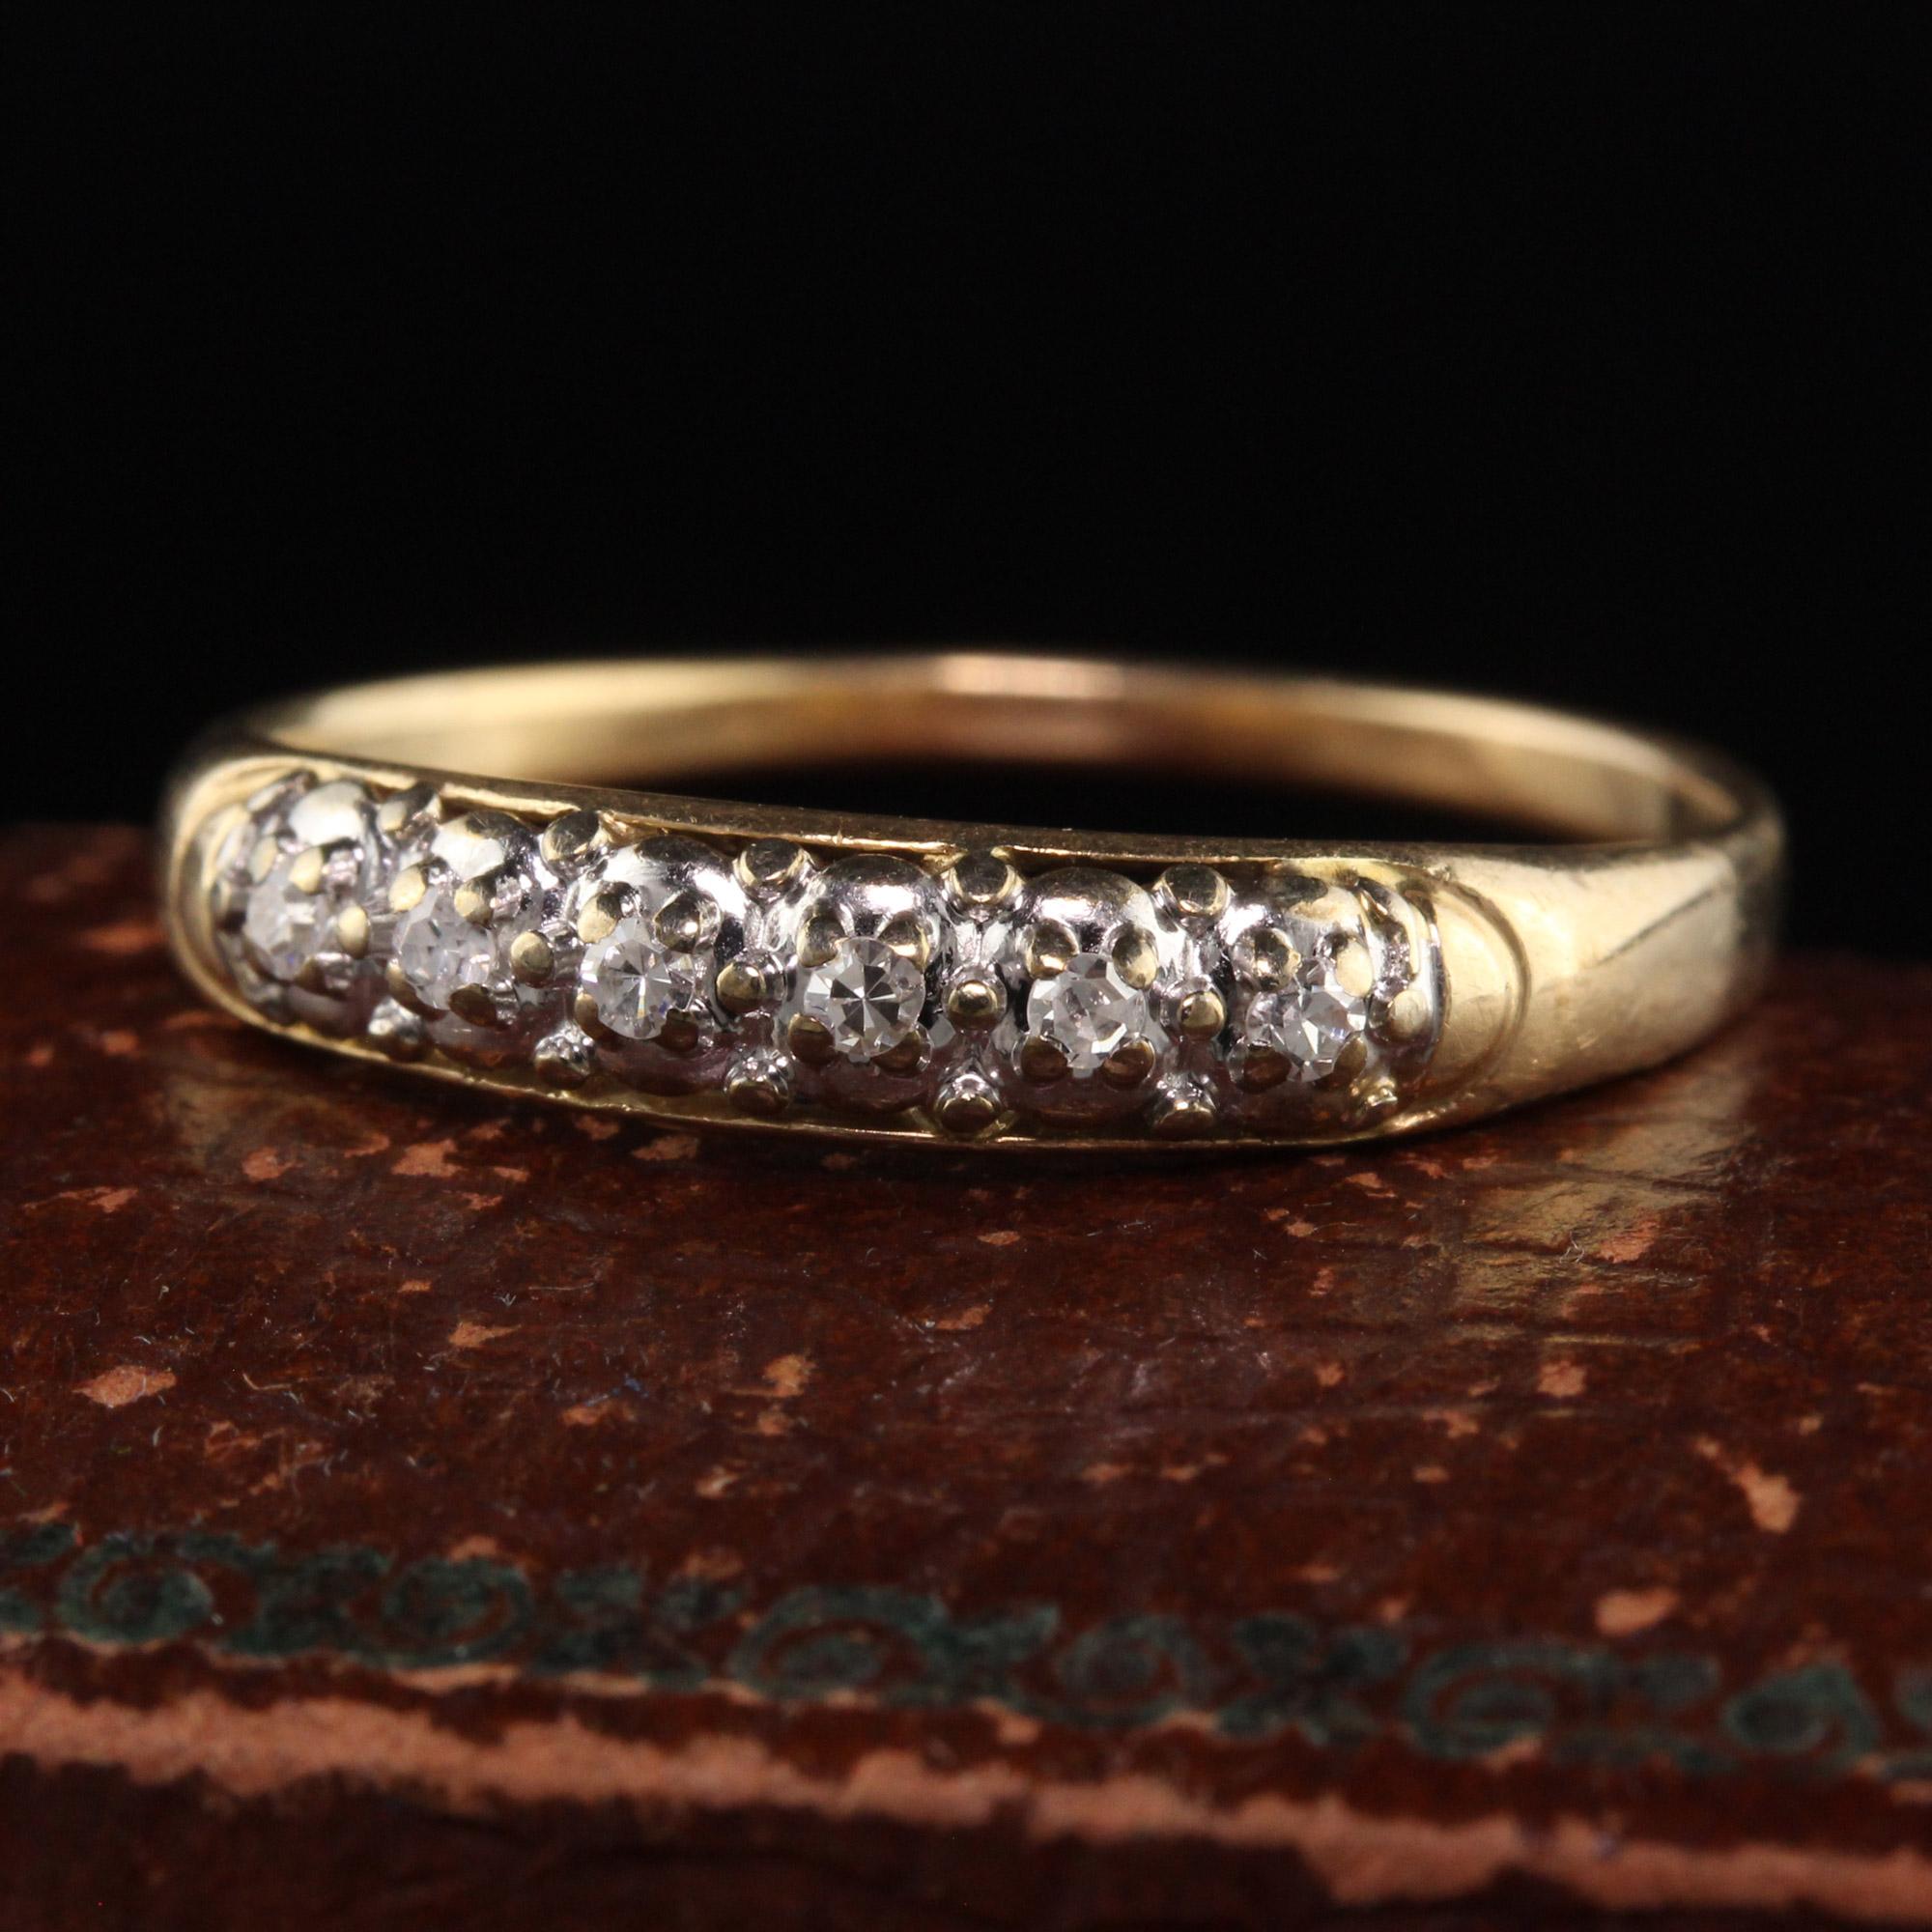 Beautiful Antique Art Deco 14K Yellow and White Gold Single Cut Diamond Wedding Band. This beautiful wedding band has single cut diamonds on the top of the band. It is crafted in 14K yellow gold and white gold top.

Item #R1165

Metal: 14K Yellow